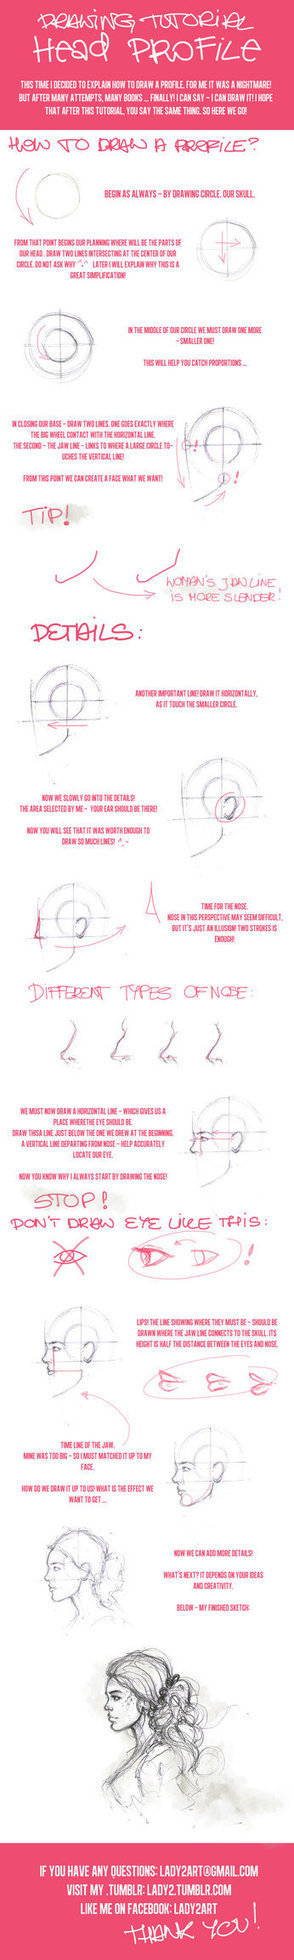 Head Profile Drawing Tutorial | Drawing References and Resources | Scoop.it